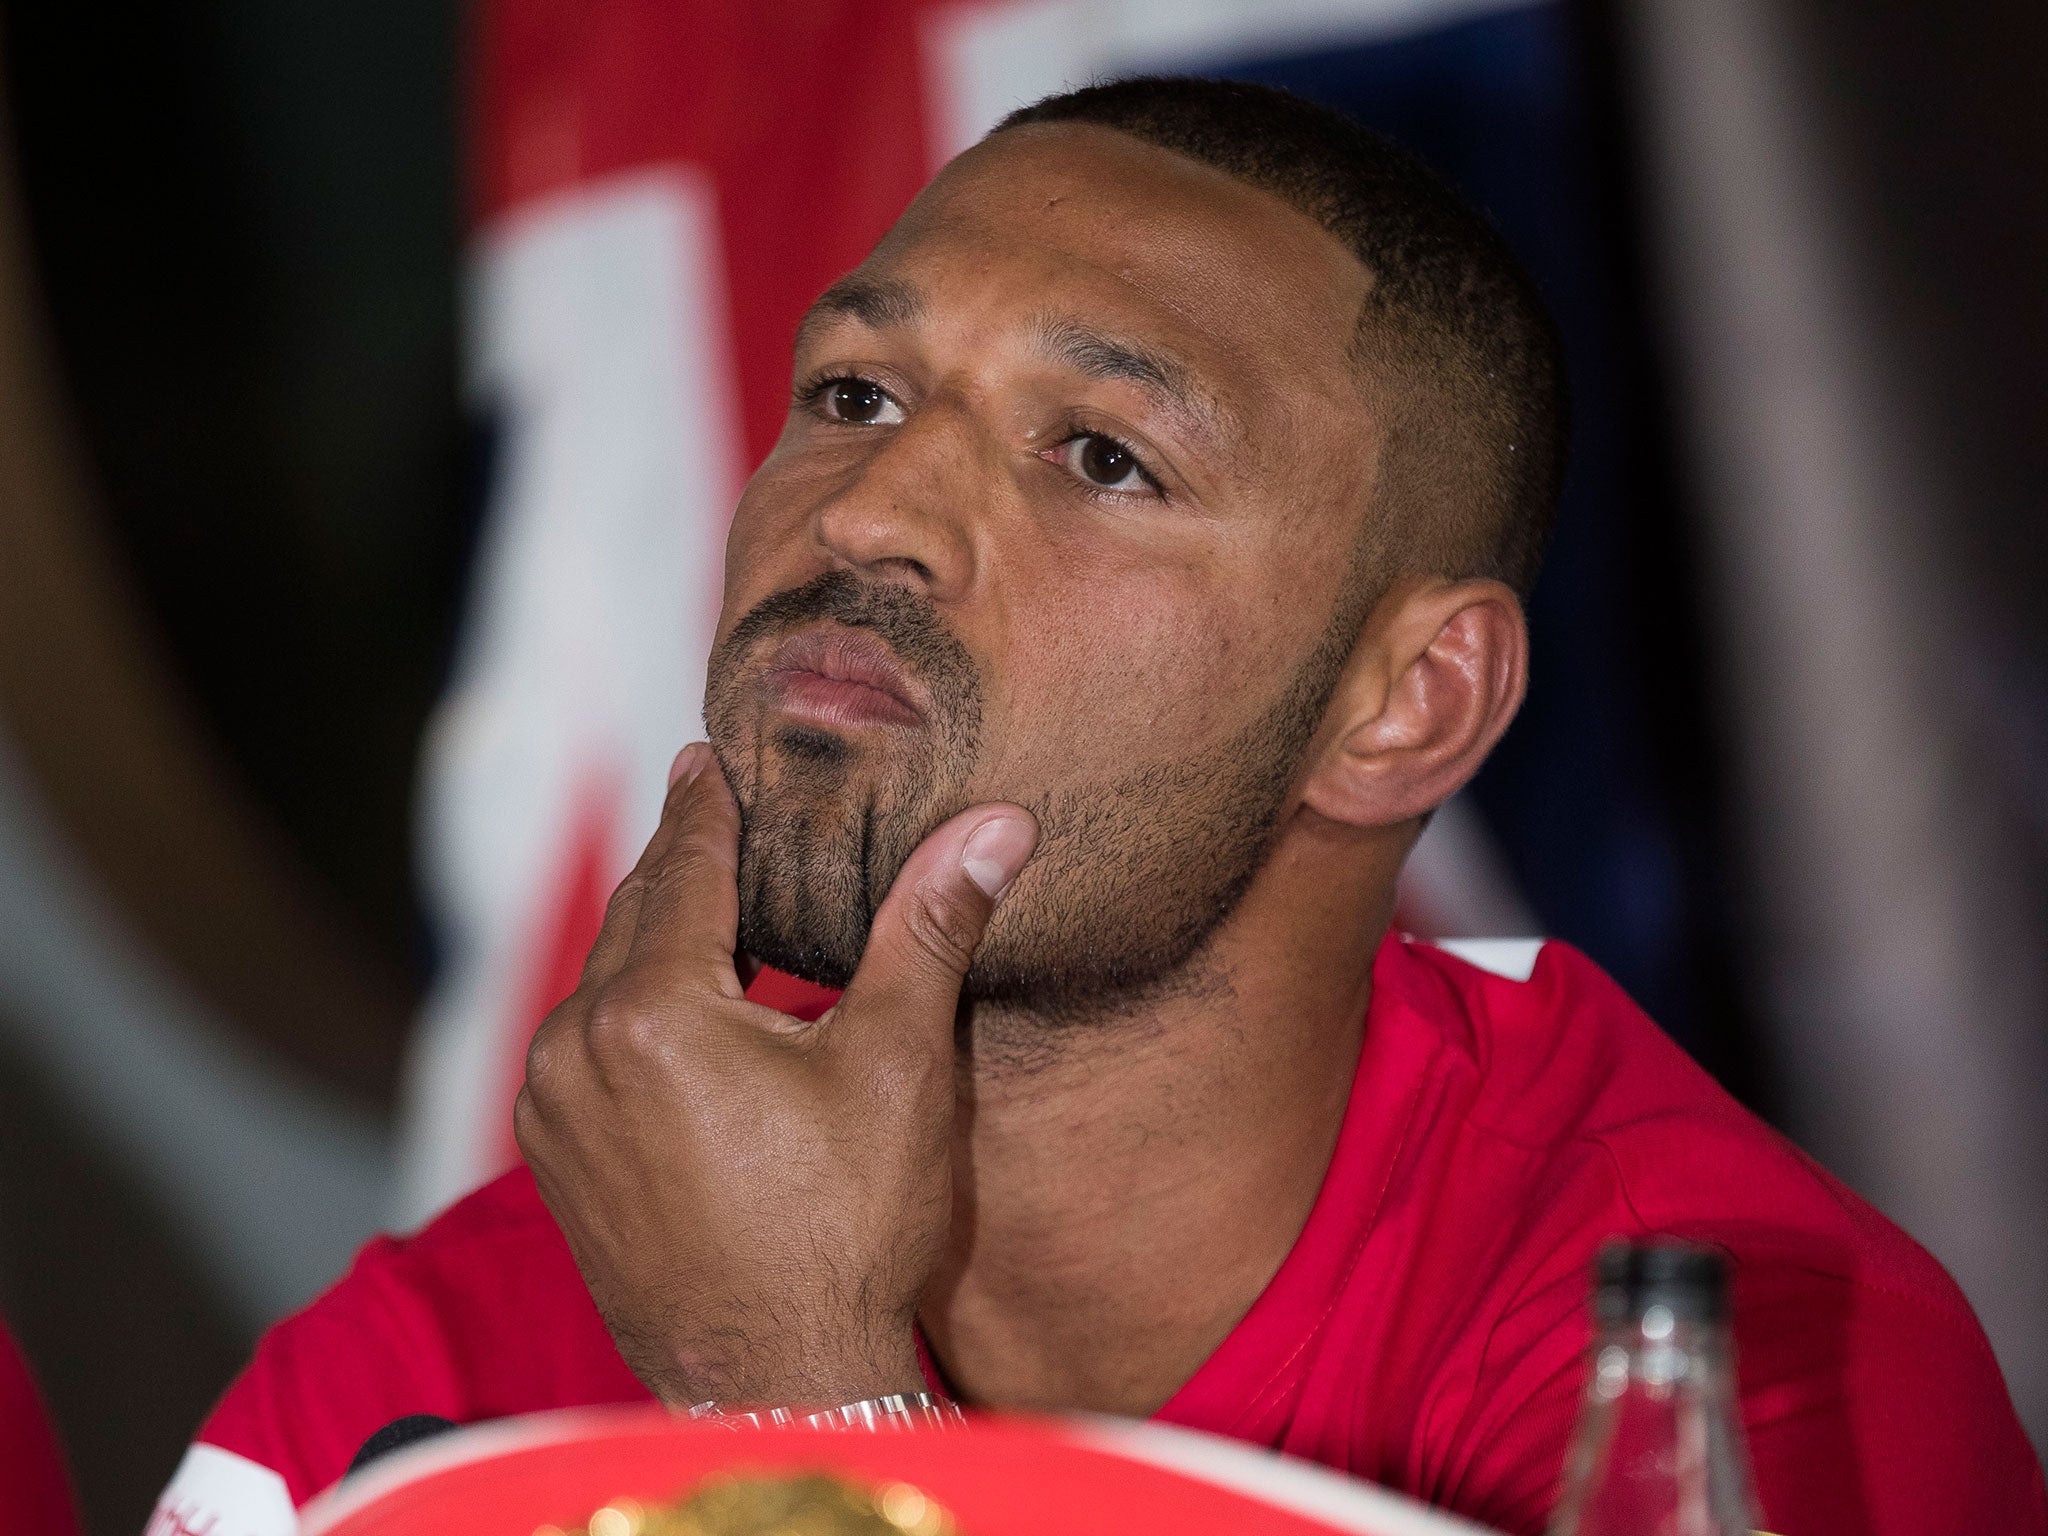 Kell Brook can get his quest to join the greats back on track if he beats Errol Spence at Bramall Lane